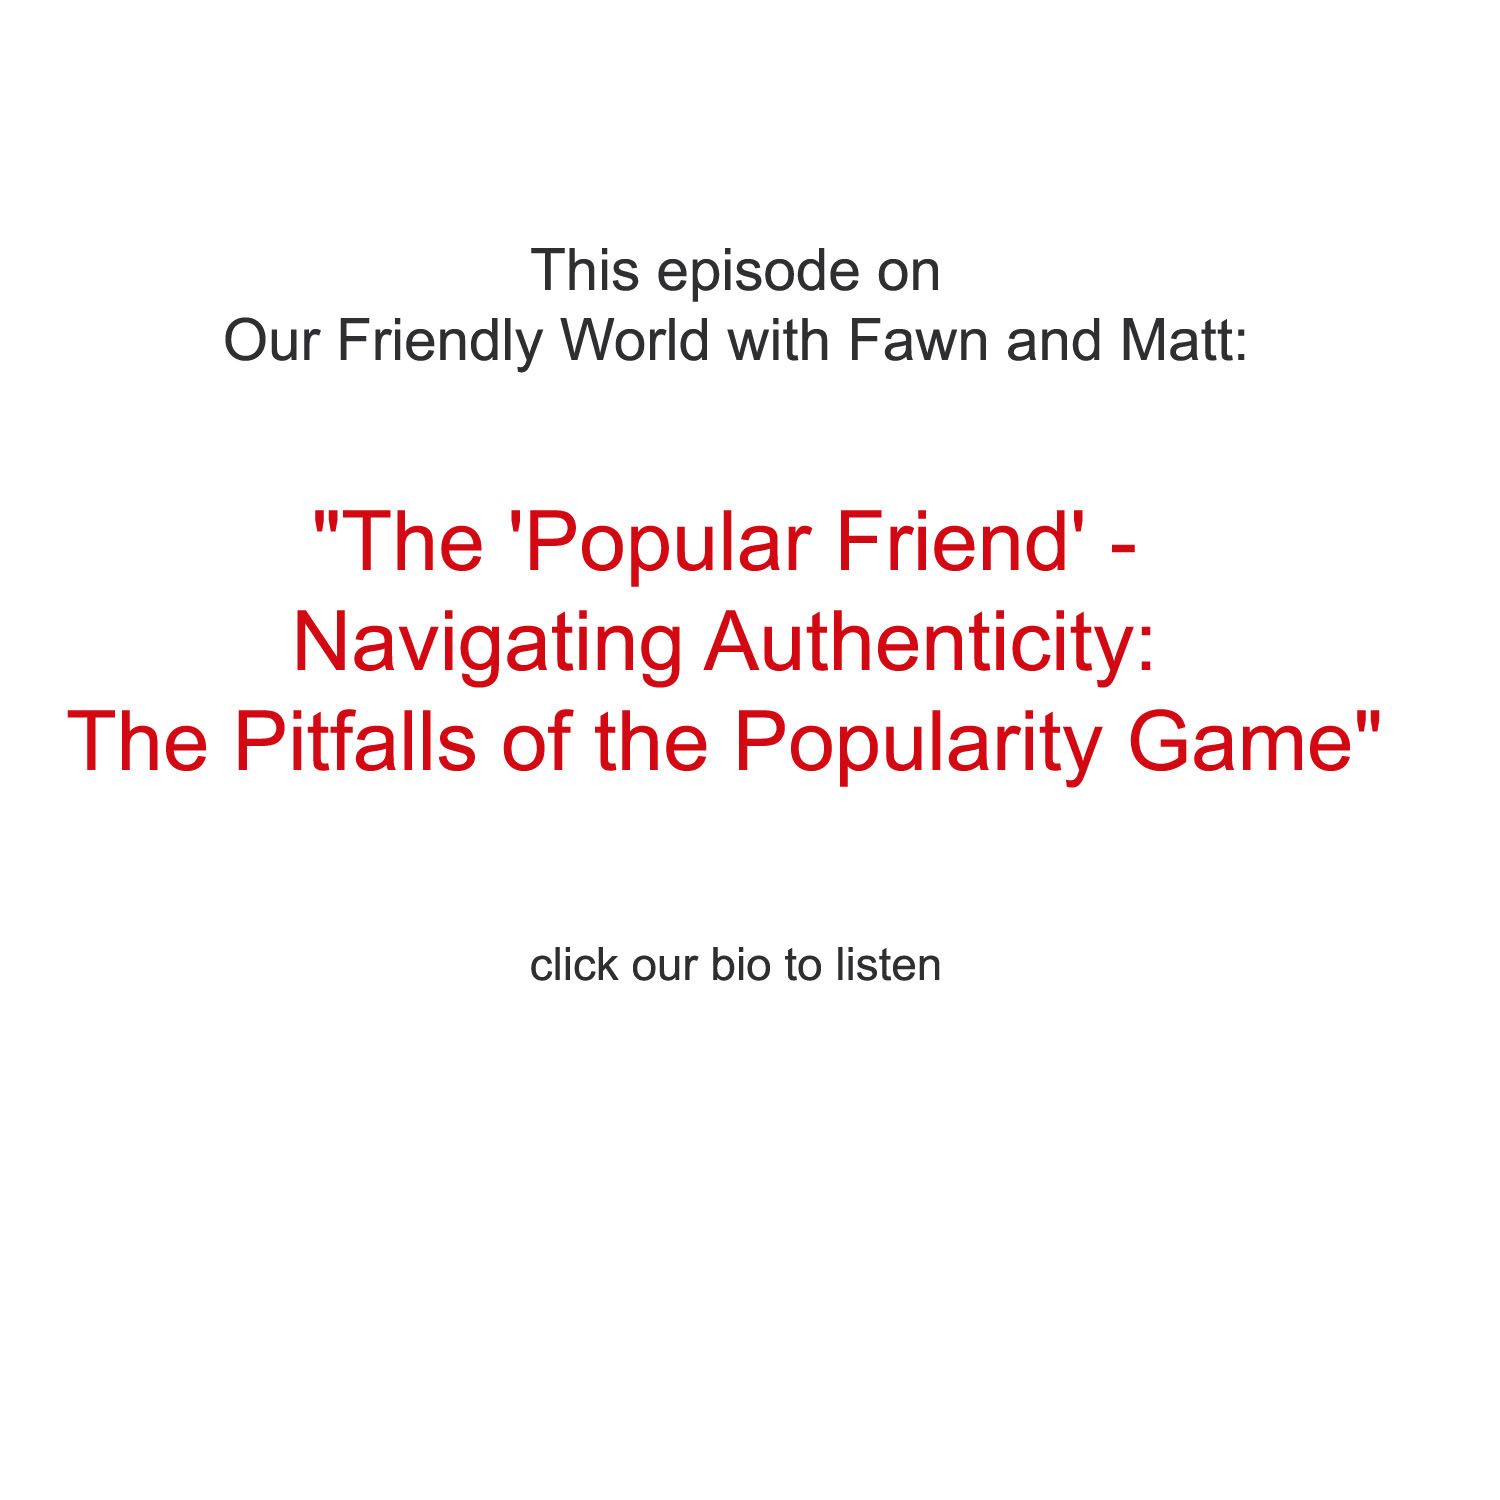 "The 'Popular Friend' - Navigating Authenticity: The Pitfalls of the Popularity Game"